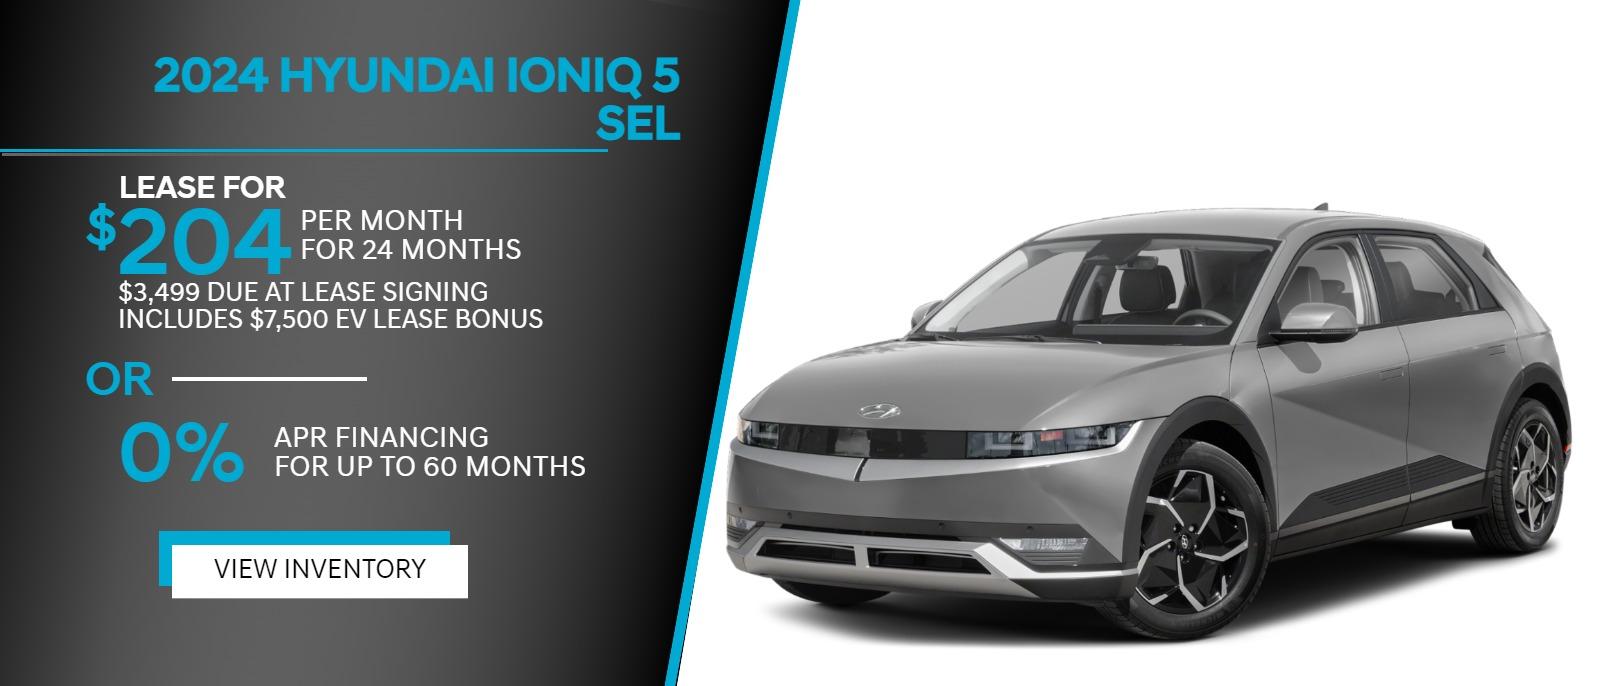 2024 IONIQ 5 SEL
$204/mo
For 24 months with $3,499 due at lease signing includes $7,500 EV Lease Bonus
0% APR
Financing for up to 60 months